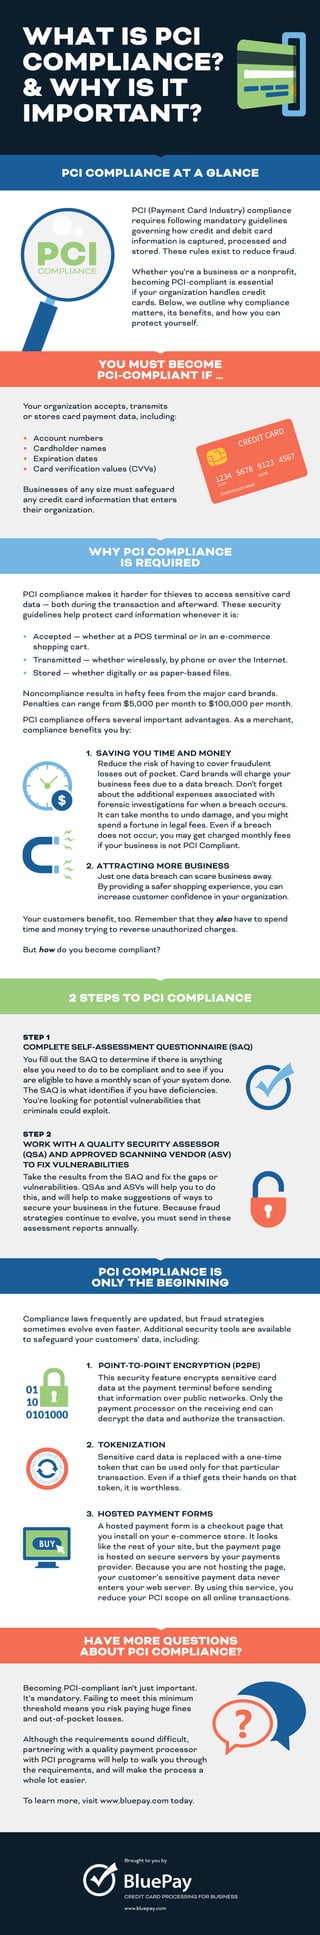 COMPLIANCE
PCI
WHAT IS PCI
COMPLIANCE?
& WHY IS IT
IMPORTANT?
PCI (Payment Card Industry) compliance
requires following mandatory guidelines
governing how credit and debit card
information is captured, processed and
stored. These rules exist to reduce fraud.
Whether you’re a business or a nonprofit,
becoming PCI-compliant is essential
if your organization handles credit
cards. Below, we outline why compliance
matters, its benefits, and how you can
protect yourself.
PCI COMPLIANCE AT A GLANCE
WHY PCI COMPLIANCE
IS REQUIRED
2 STEPS TO PCI COMPLIANCE
PCI COMPLIANCE IS
ONLY THE BEGINNING
Your organization accepts, transmits
or stores card payment data, including:
• Account numbers
• Cardholder names
• Expiration dates
• Card verification values (CVVs)
Businesses of any size must safeguard
any credit card information that enters
their organization.
PCI compliance makes it harder for thieves to access sensitive card
data — both during the transaction and afterward. These security
guidelines help protect card information whenever it is:
• Accepted — whether at a POS terminal or in an e-commerce
shopping cart.
• Transmitted — whether wirelessly, by phone or over the Internet.
• Stored — whether digitally or as paper-based files.
Noncompliance results in hefty fees from the major card brands.
Penalties can range from $5,000 per month to $100,000 per month.
PCI compliance offers several important advantages. As a merchant,
compliance benefits you by:
1. SAVING YOU TIME AND MONEY
Reduce the risk of having to cover fraudulent
losses out of pocket. Card brands will charge your
business fees due to a data breach. Don’t forget
about the additional expenses associated with
forensic investigations for when a breach occurs.
It can take months to undo damage, and you might
spend a fortune in legal fees. Even if a breach
does not occur, you may get charged monthly fees
if your business is not PCI Compliant.
2.  ATTRACTING MORE BUSINESS
Just one data breach can scare business away.
By providing a safer shopping experience, you can
increase customer confidence in your organization.
Your customers benefit, too. Remember that they also have to spend
time and money trying to reverse unauthorized charges.
But how do you become compliant?
STEP 1
You fill out the SAQ to determine if there is anything
else you need to do to be compliant and to see if you
are eligible to have a monthly scan of your system done.
The SAQ is what identifies if you have deficiencies.
You’re looking for potential vulnerabilities that
criminals could exploit.
STEP 2
WORK WITH A QUALITY SECURITY ASSESSOR
(QSA) AND APPROVED SCANNING VENDOR (ASV)
TO FIX VULNERABILITIES
Take the results from the SAQ and fix the gaps or
vulnerabilities. QSAs and ASVs will help you to do
this, and will help to make suggestions of ways to
secure your business in the future. Because fraud
strategies continue to evolve, you must send in these
assessment reports annually.
Compliance laws frequently are updated, but fraud strategies
sometimes evolve even faster. Additional security tools are available
to safeguard your customers’ data, including:
1. POINT-TO-POINT ENCRYPTION (P2PE)
This security feature encrypts sensitive card
data at the payment terminal before sending
that information over public networks. Only the
payment processor on the receiving end can
decrypt the data and authorize the transaction.
2. TOKENIZATION
Sensitive card data is replaced with a one-time
token that can be used only for that particular
transaction. Even if a thief gets their hands on that
token, it is worthless.
3. HOSTED PAYMENT FORMS
A hosted payment form is a checkout page that
you install on your e-commerce store. It looks
like the rest of your site, but the payment page
is hosted on secure servers by your payments
provider. Because you are not hosting the page,
your customer’s sensitive payment data never
enters your web server. By using this service, you
reduce your PCI scope on all online transactions.
Becoming PCI-compliant isn’t just important.
It’s mandatory. Failing to meet this minimum
threshold means you risk paying huge fines
and out-of-pocket losses.
Although the requirements sound difficult,
partnering with a quality payment processor
with PCI programs will help to walk you through
the requirements, and will make the process a
whole lot easier.
To learn more, visit www.bluepay.com today.
HAVE MORE QUESTIONS
ABOUT PCI COMPLIANCE?
YOU MUST BECOME
PCI-COMPLIANT IF …
COMPLETE SELF-ASSESSMENT QUESTIONNAIRE (SAQ)
Brought to you by
www.bluepay.com
 